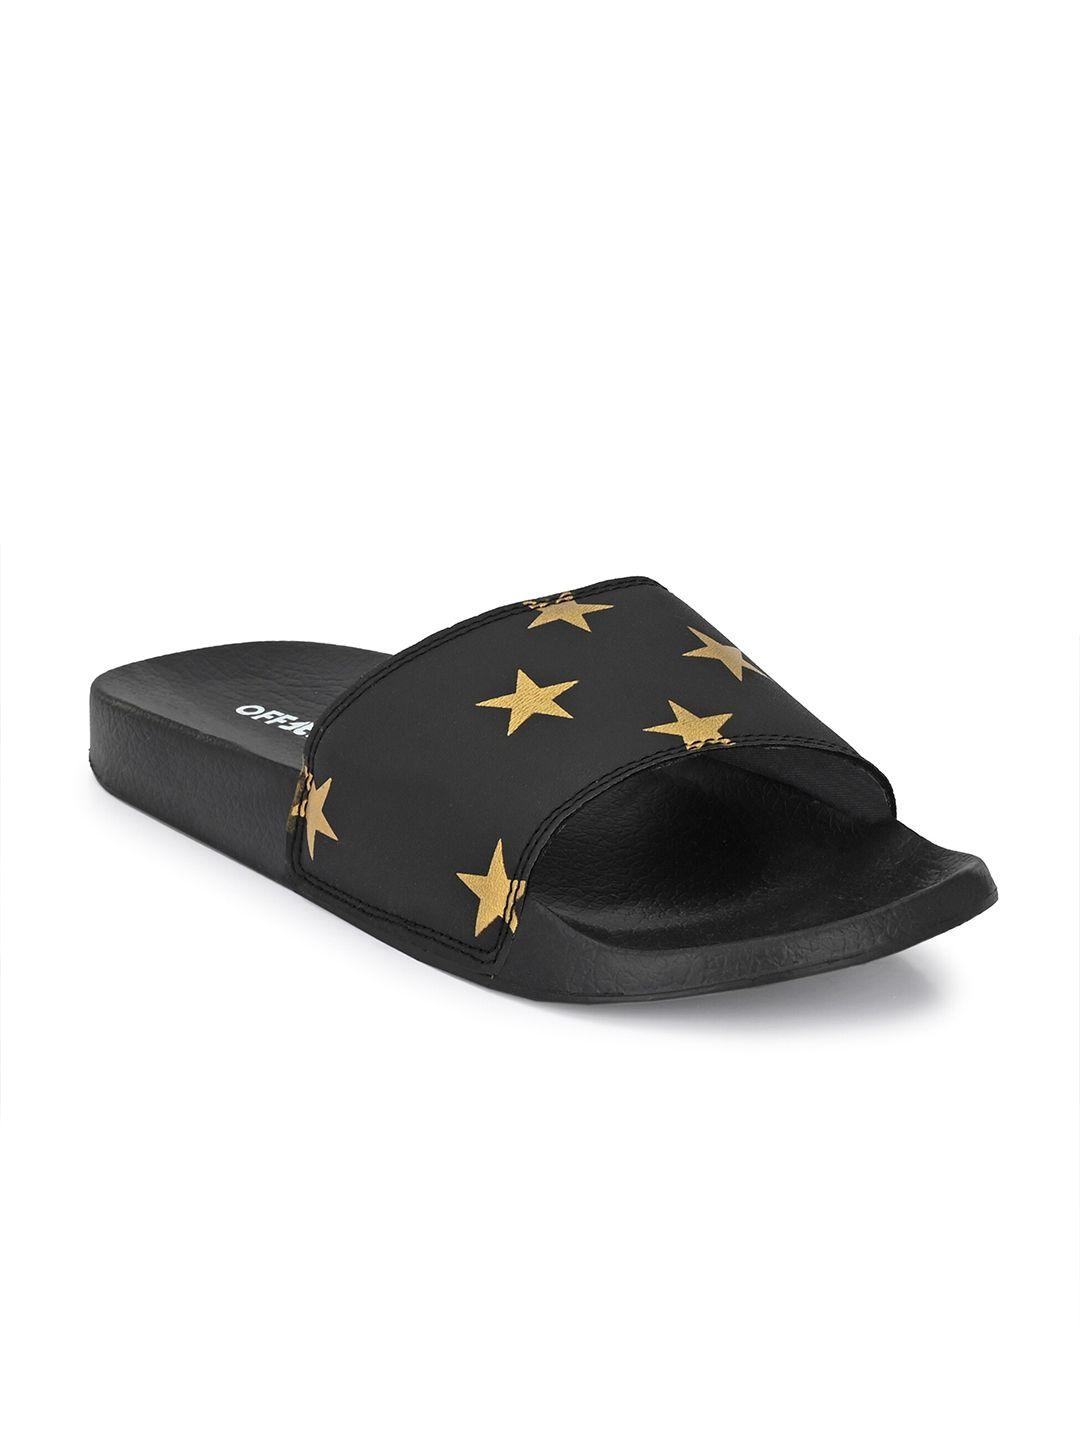 off limits women black & gold-toned printed sliders